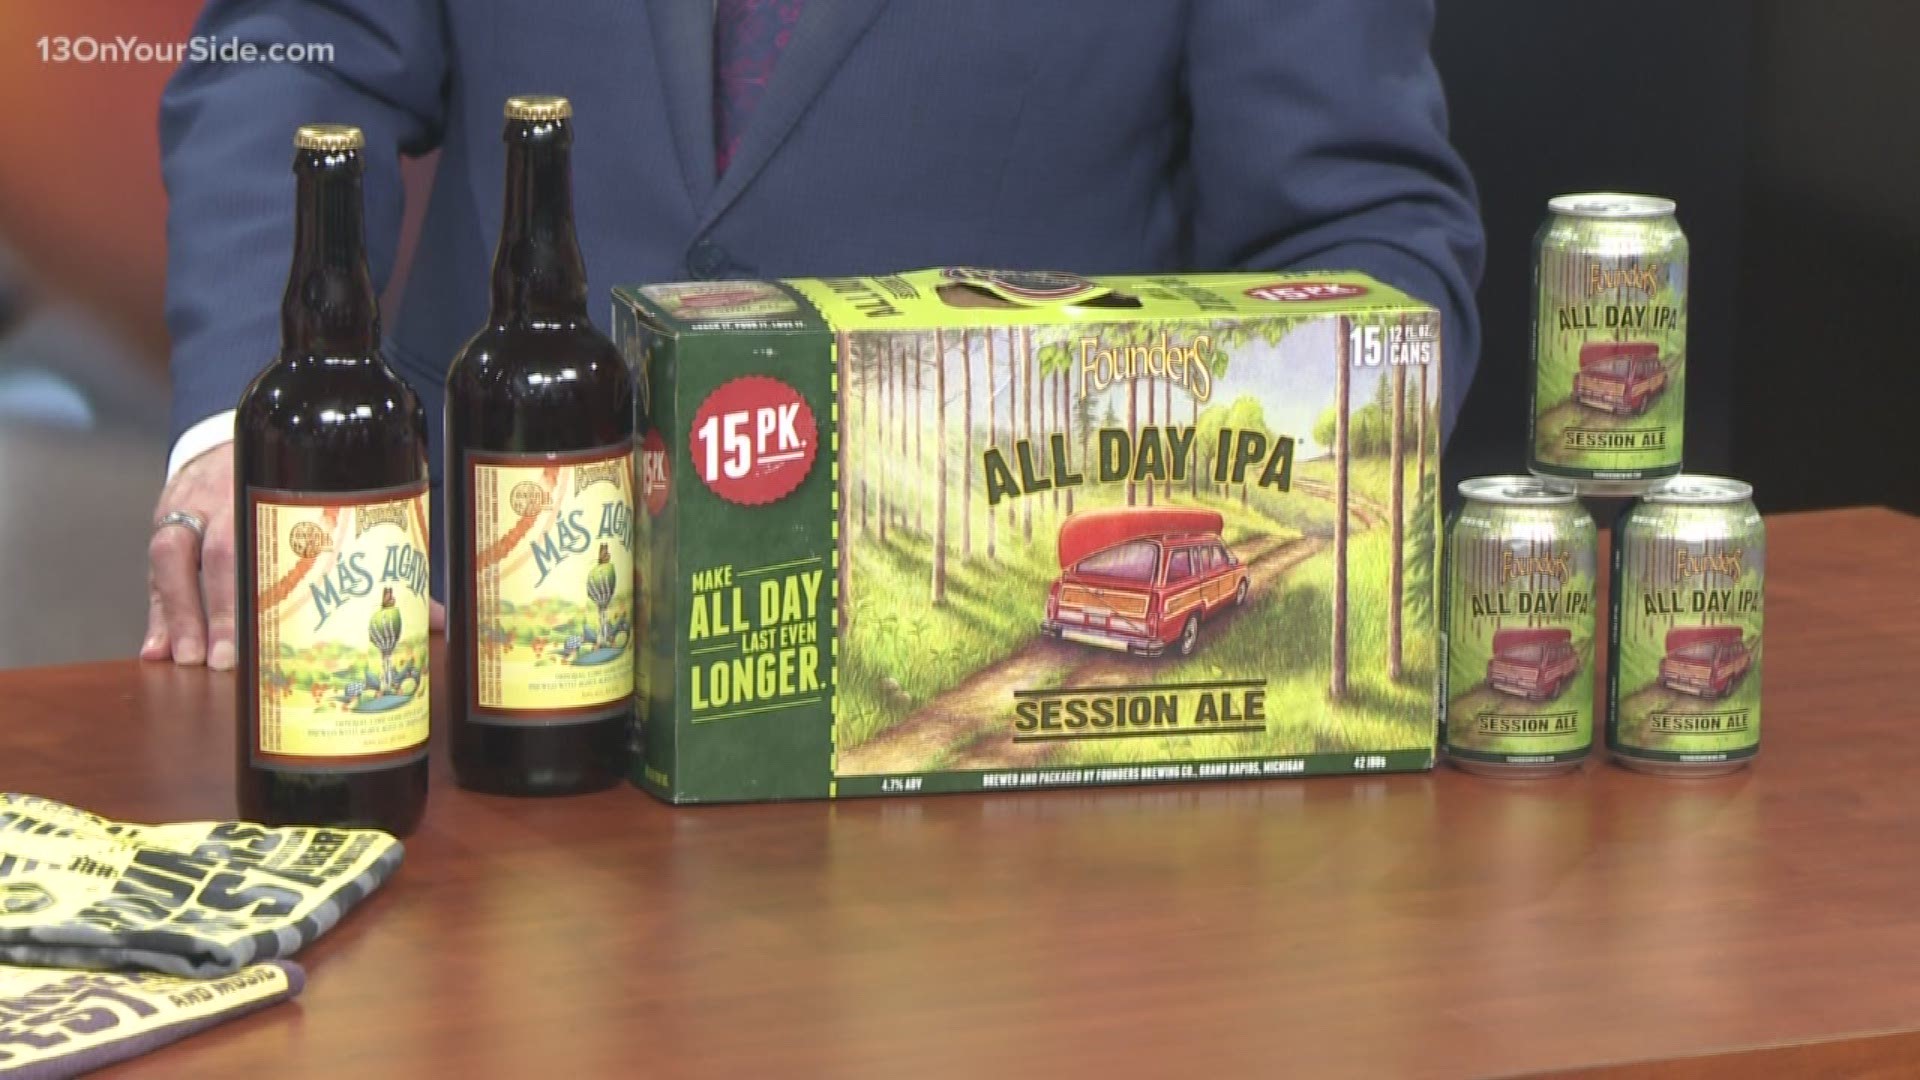 This year, Founders Brewing Company is hosting the 12th annual Founders Fest. The party on June 22 will be in the streets outside the brewery's Grand Rapids taproom and brewery.